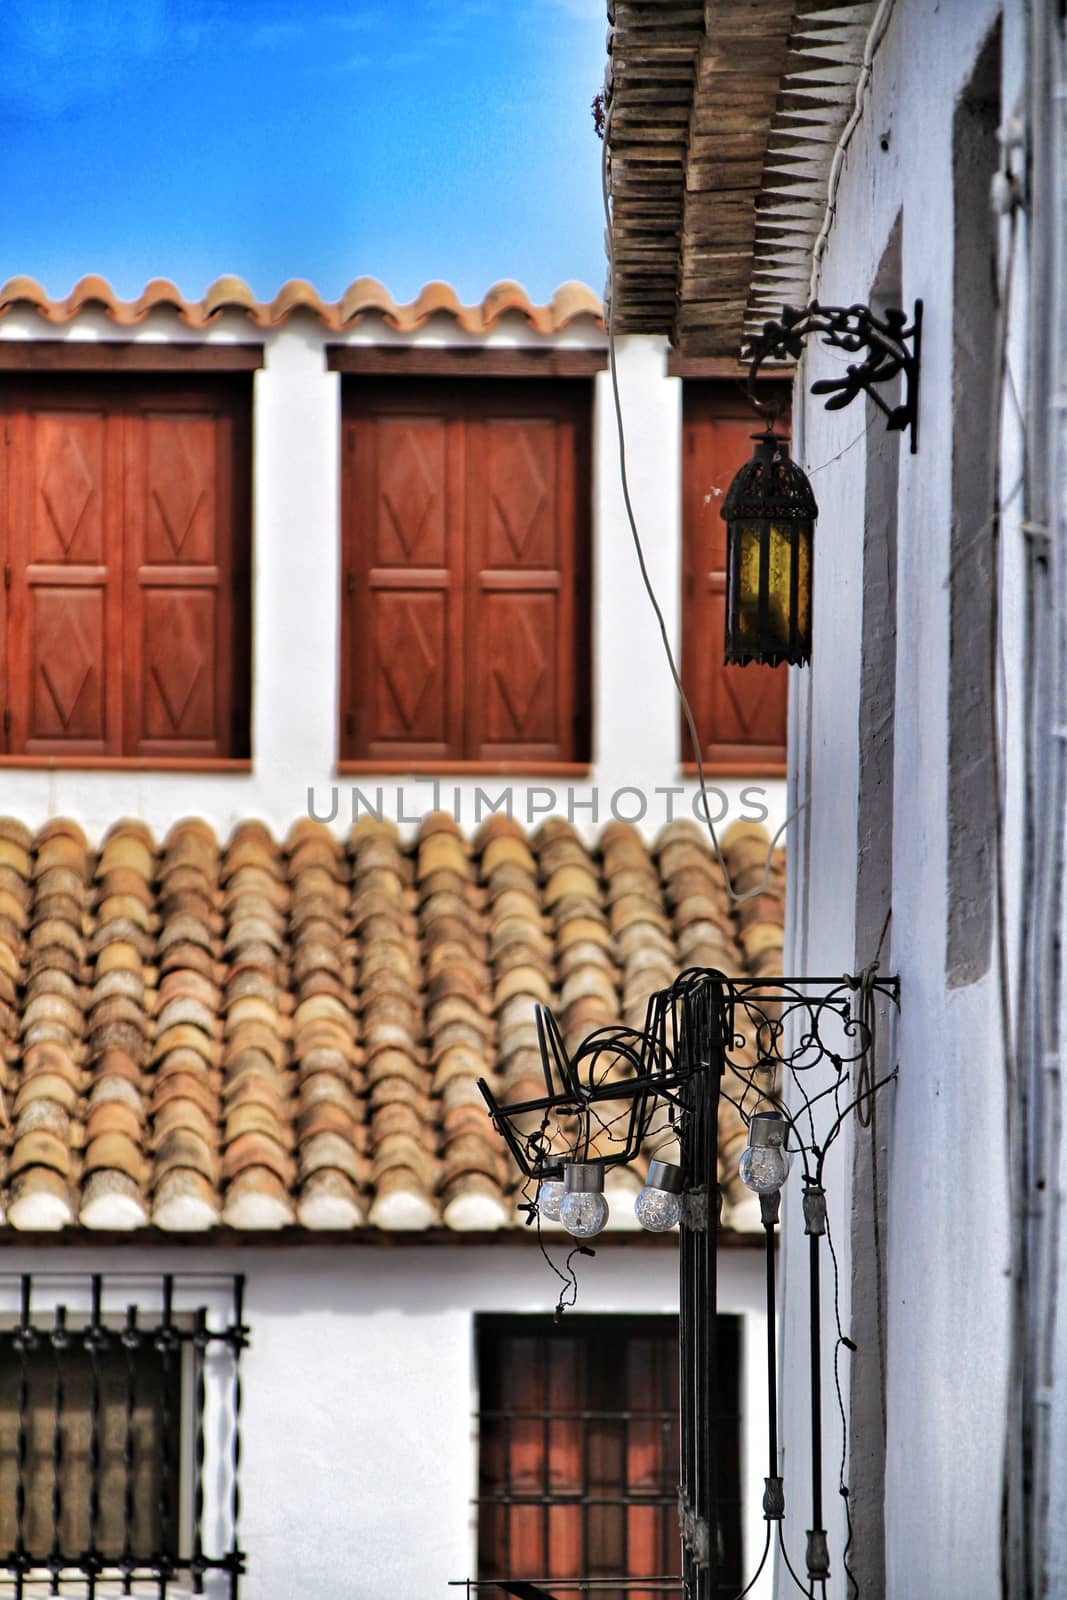 Narrow streets and white facades in Altea by soniabonet